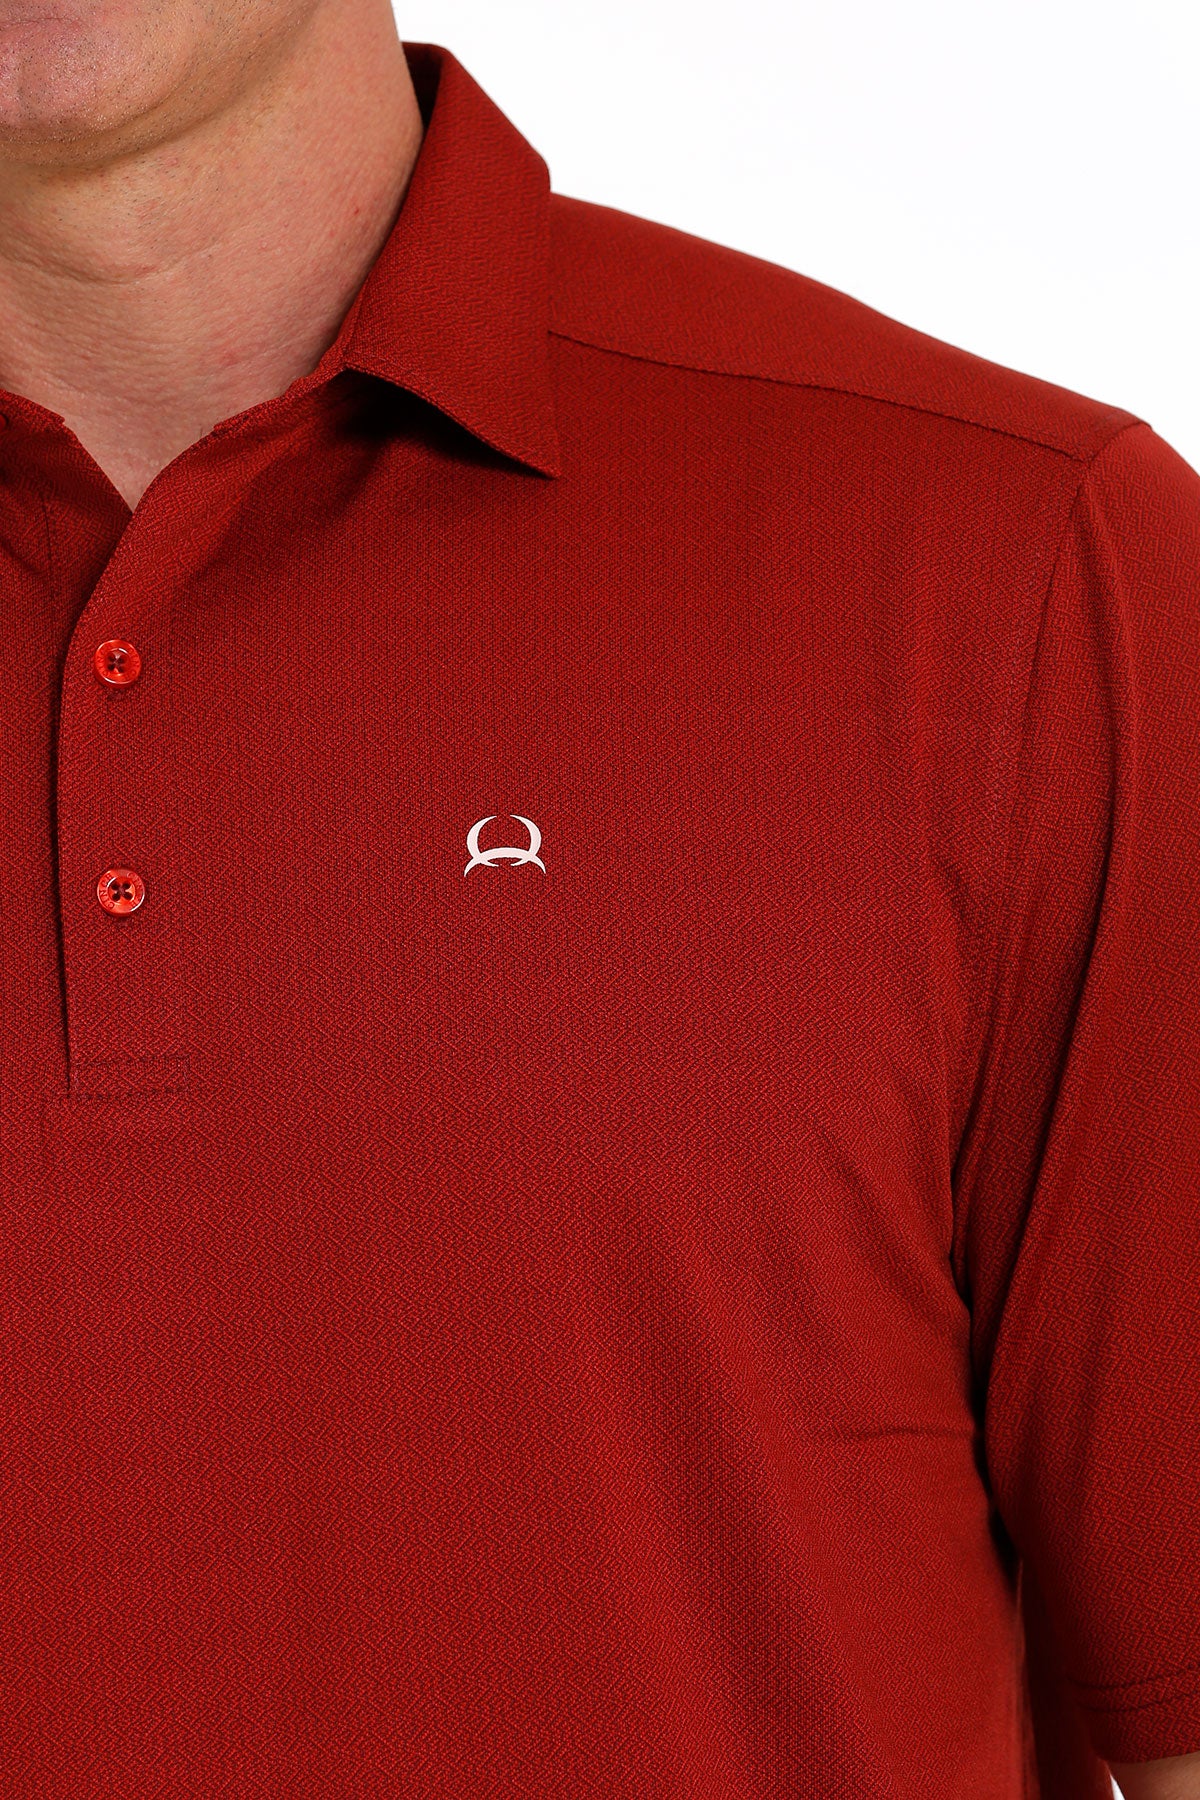 CINCH MEN'S SHORT SLEEVE ARENAFLEX POLO SHIRT - SOLID RED